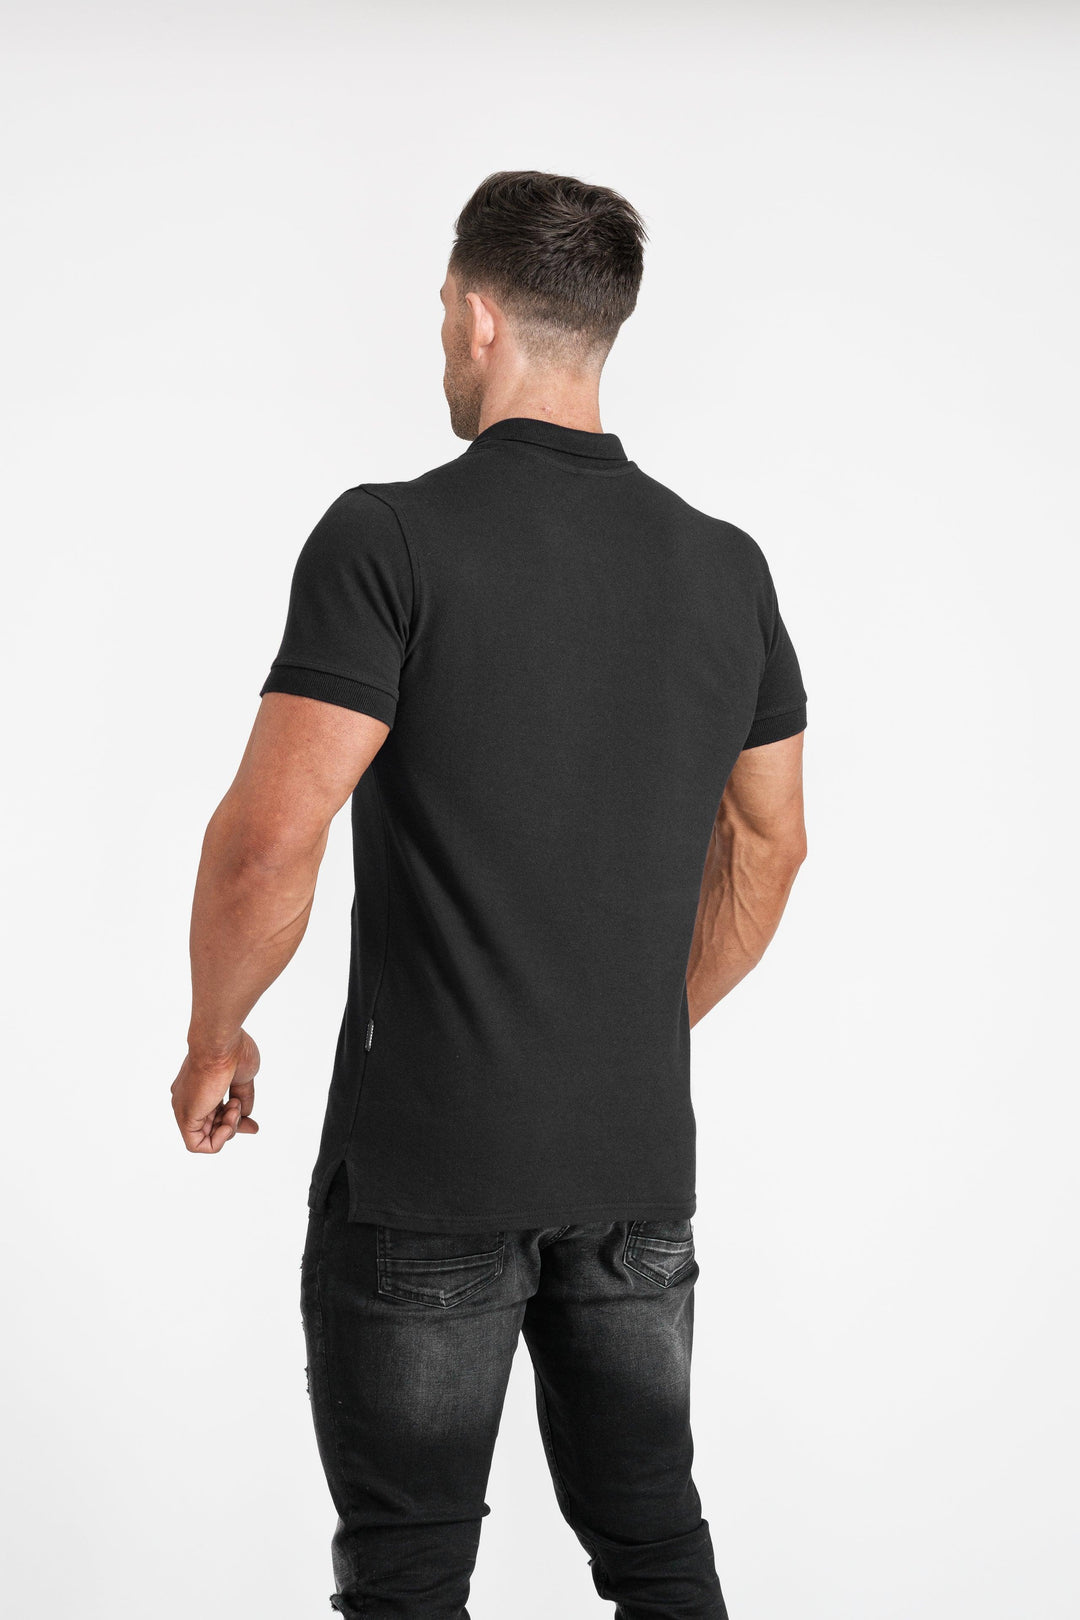 Mens Black Tapered Fit Polo Shirt. A Proportionally Fitted and Muscle Fit T Shirt. Ideal for muscular guys.